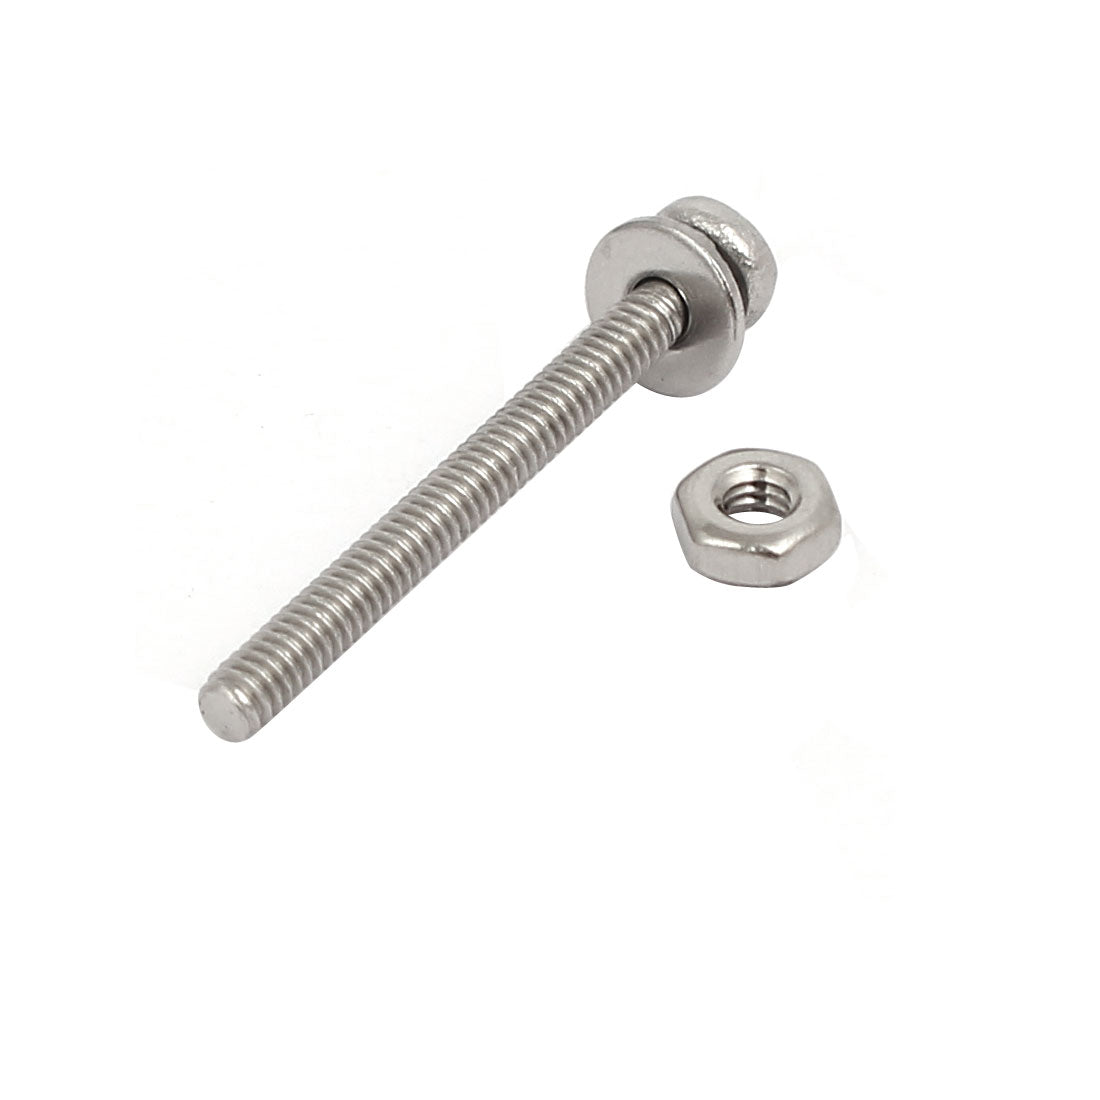 uxcell Uxcell M2x20mm 304 Stainless Steel Phillips Pan Head Bolt Screw Nut w Washer 18 Sets